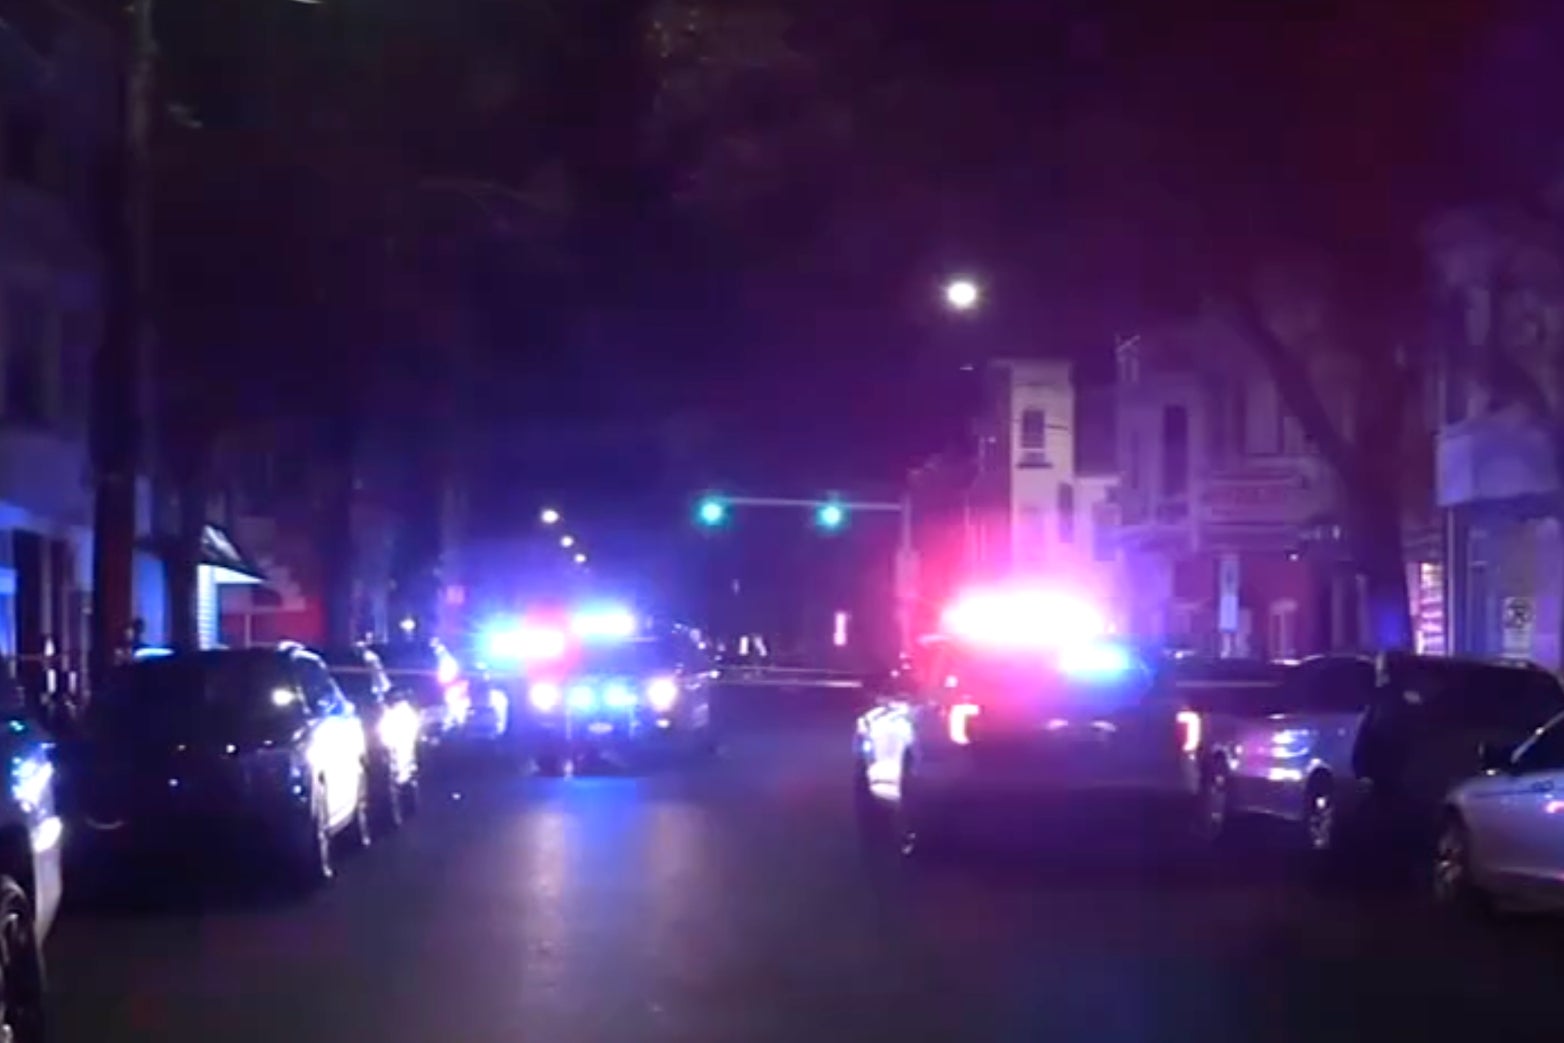 Police in Allentown, Pennsylvania investigate a shooting that left a child and a woman dead